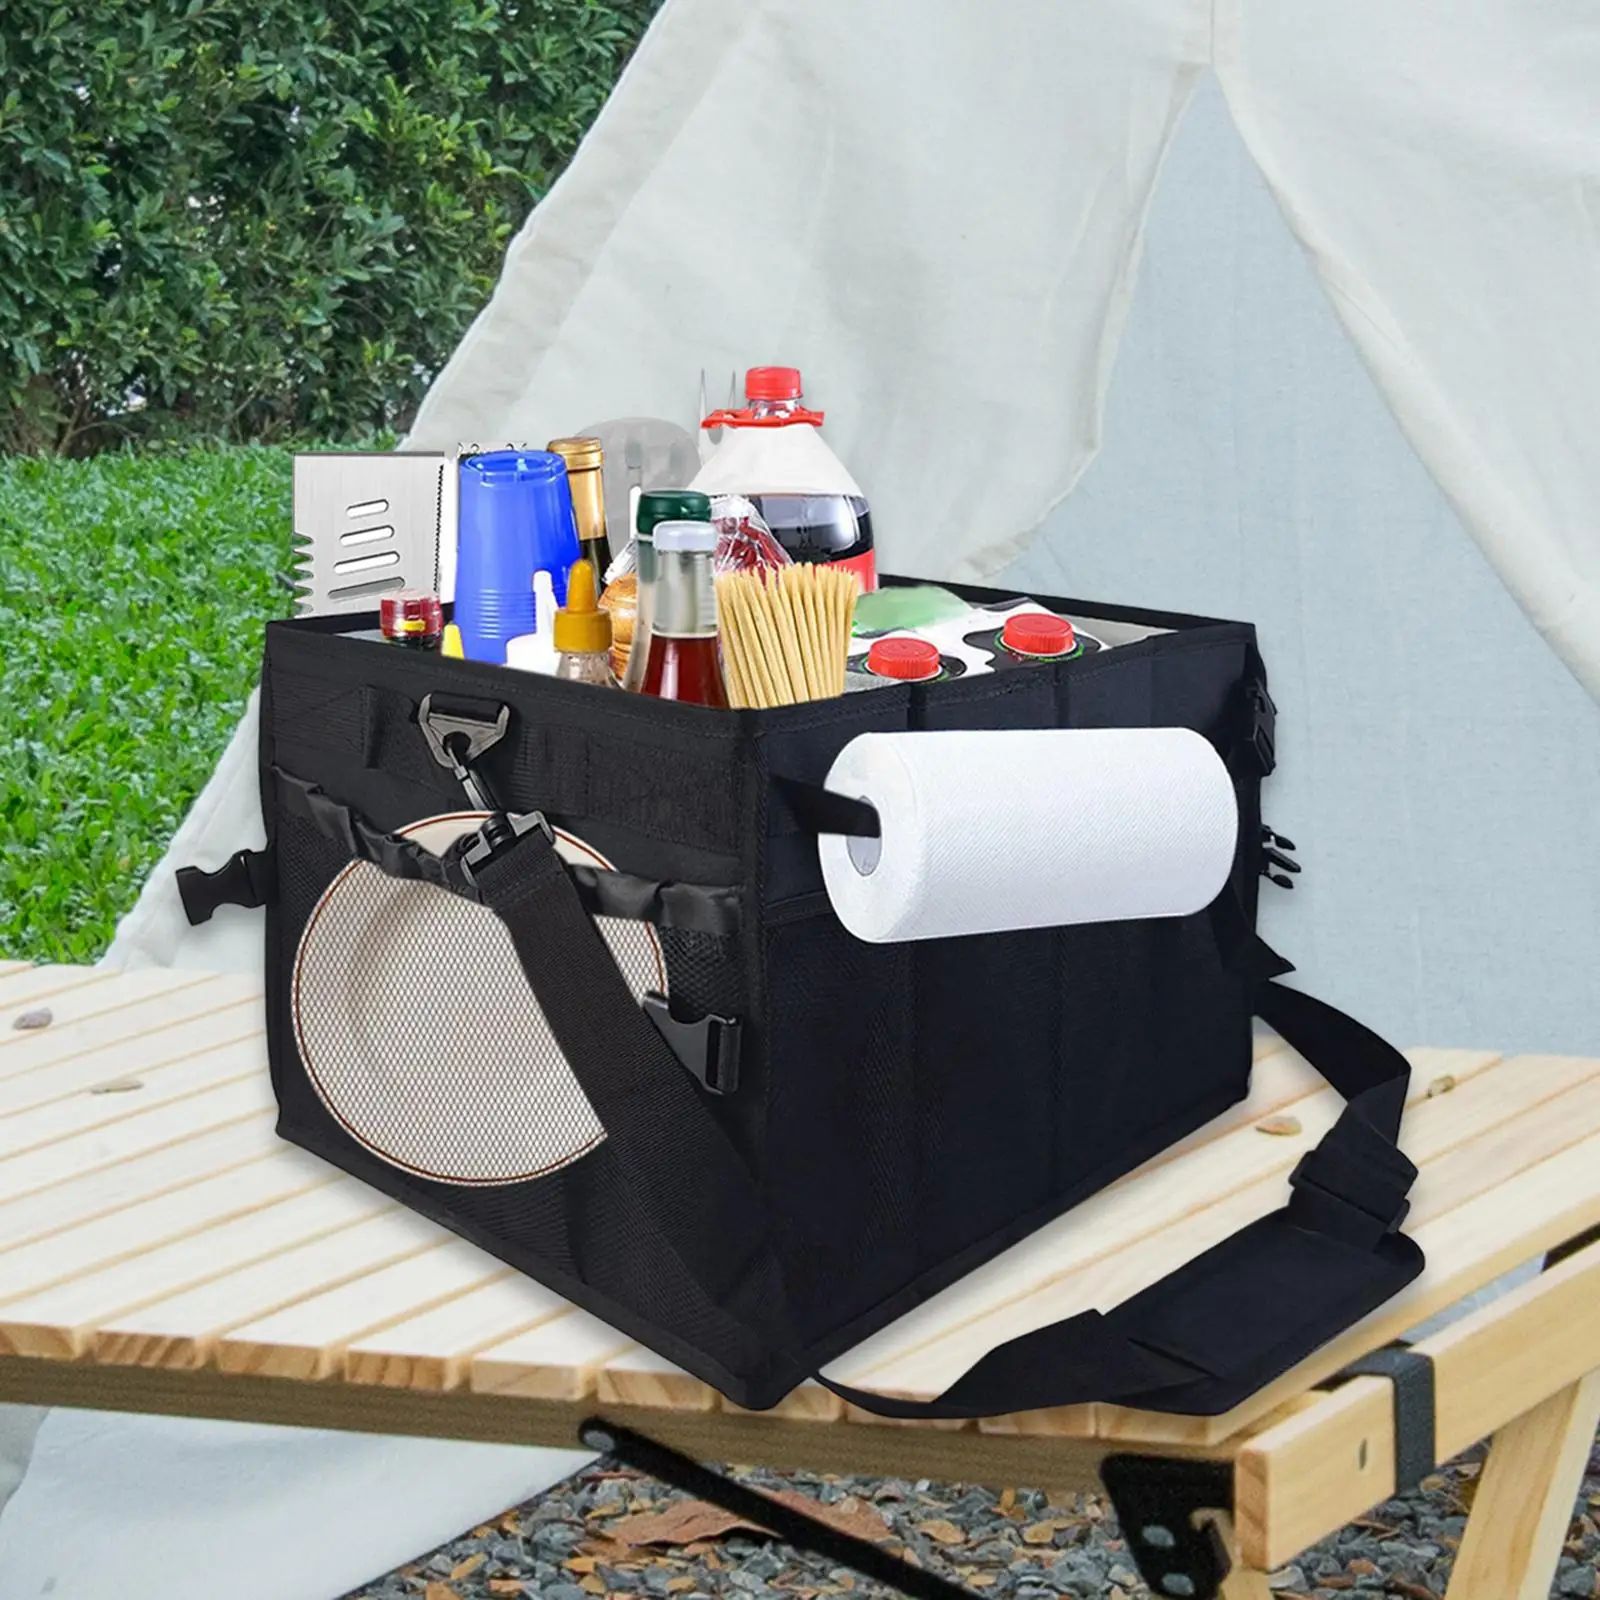 Foldable BBQ Tool Storage Bag Barbecue Equipment Storage Bag for Outdoor RV